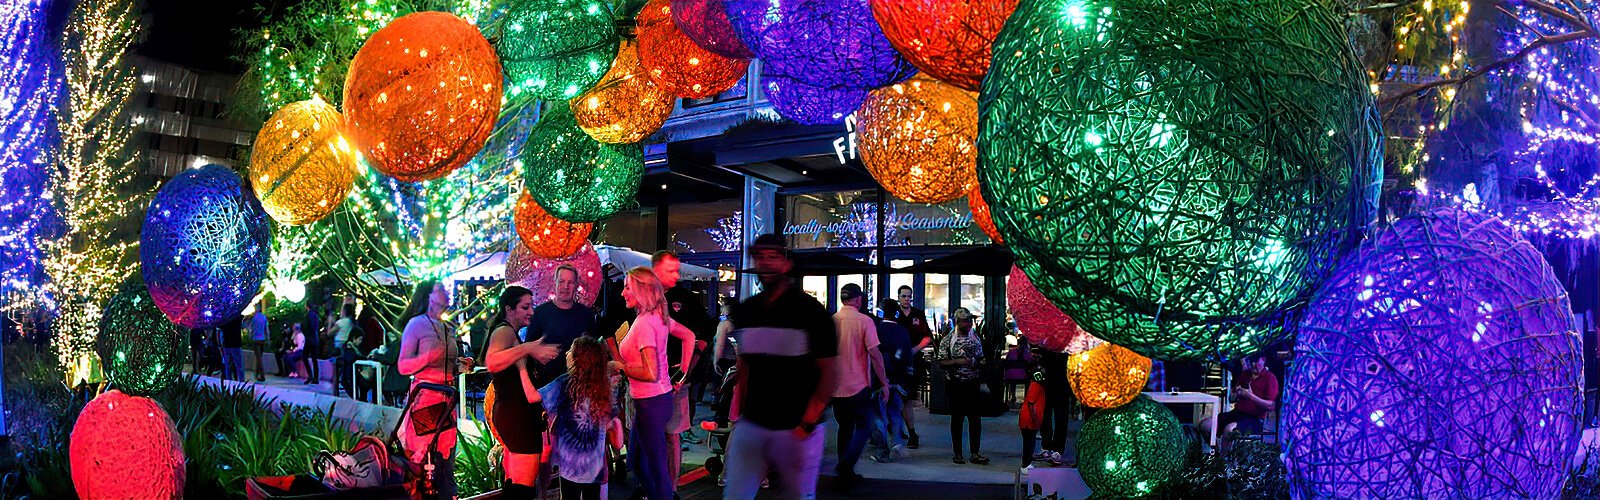  Colorful festive décor spreads joy, beauty and cheers to all present at the Season Spectacular at Water Street Tampa.